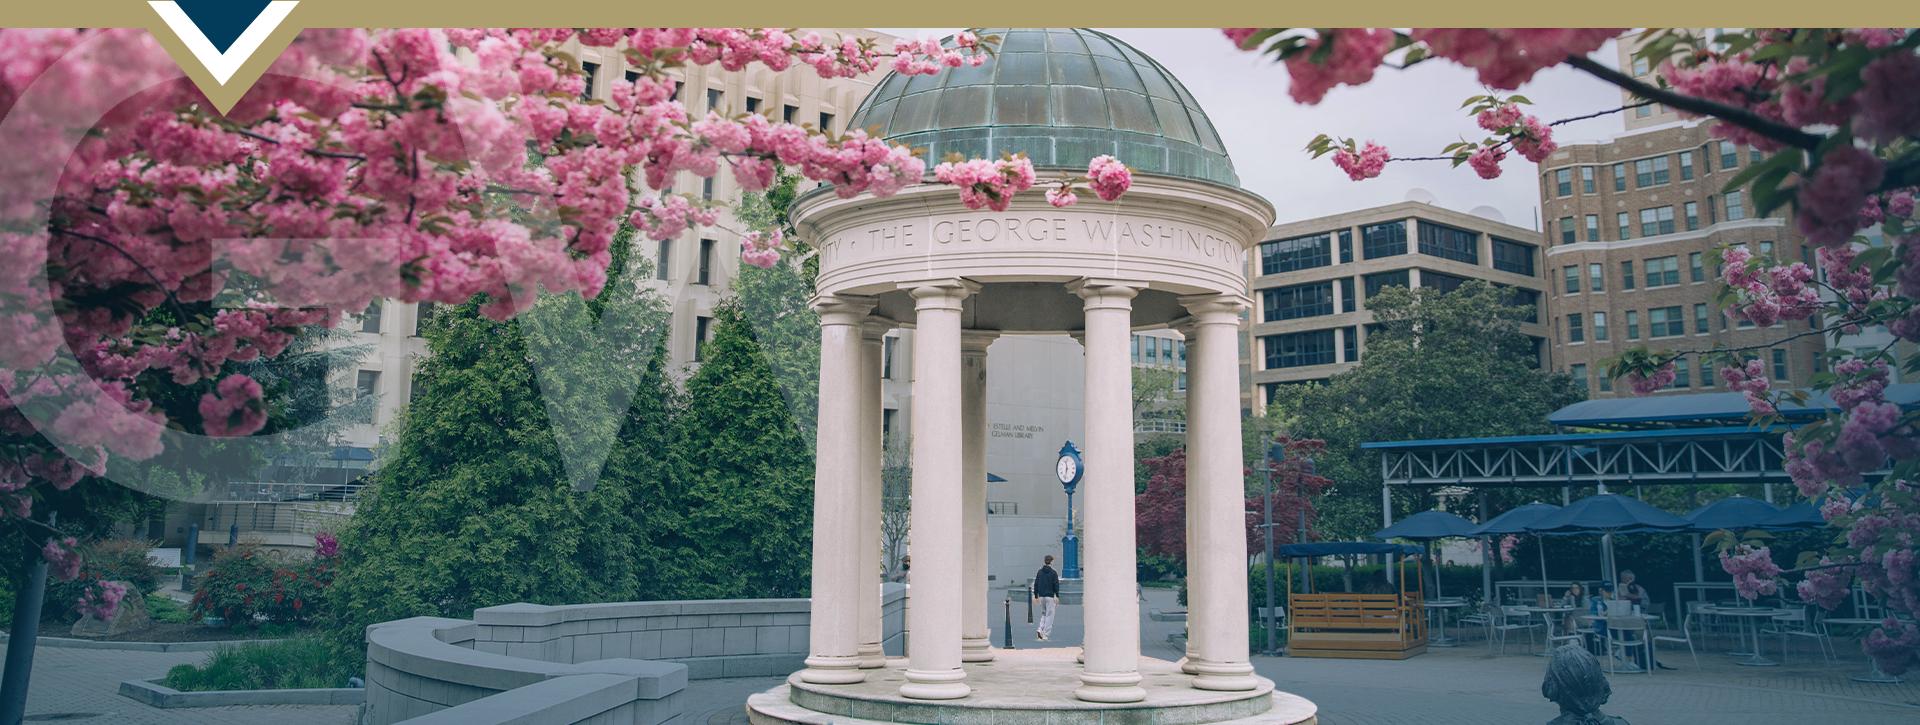 Tempietto on GW campus framed by cherry blossoms